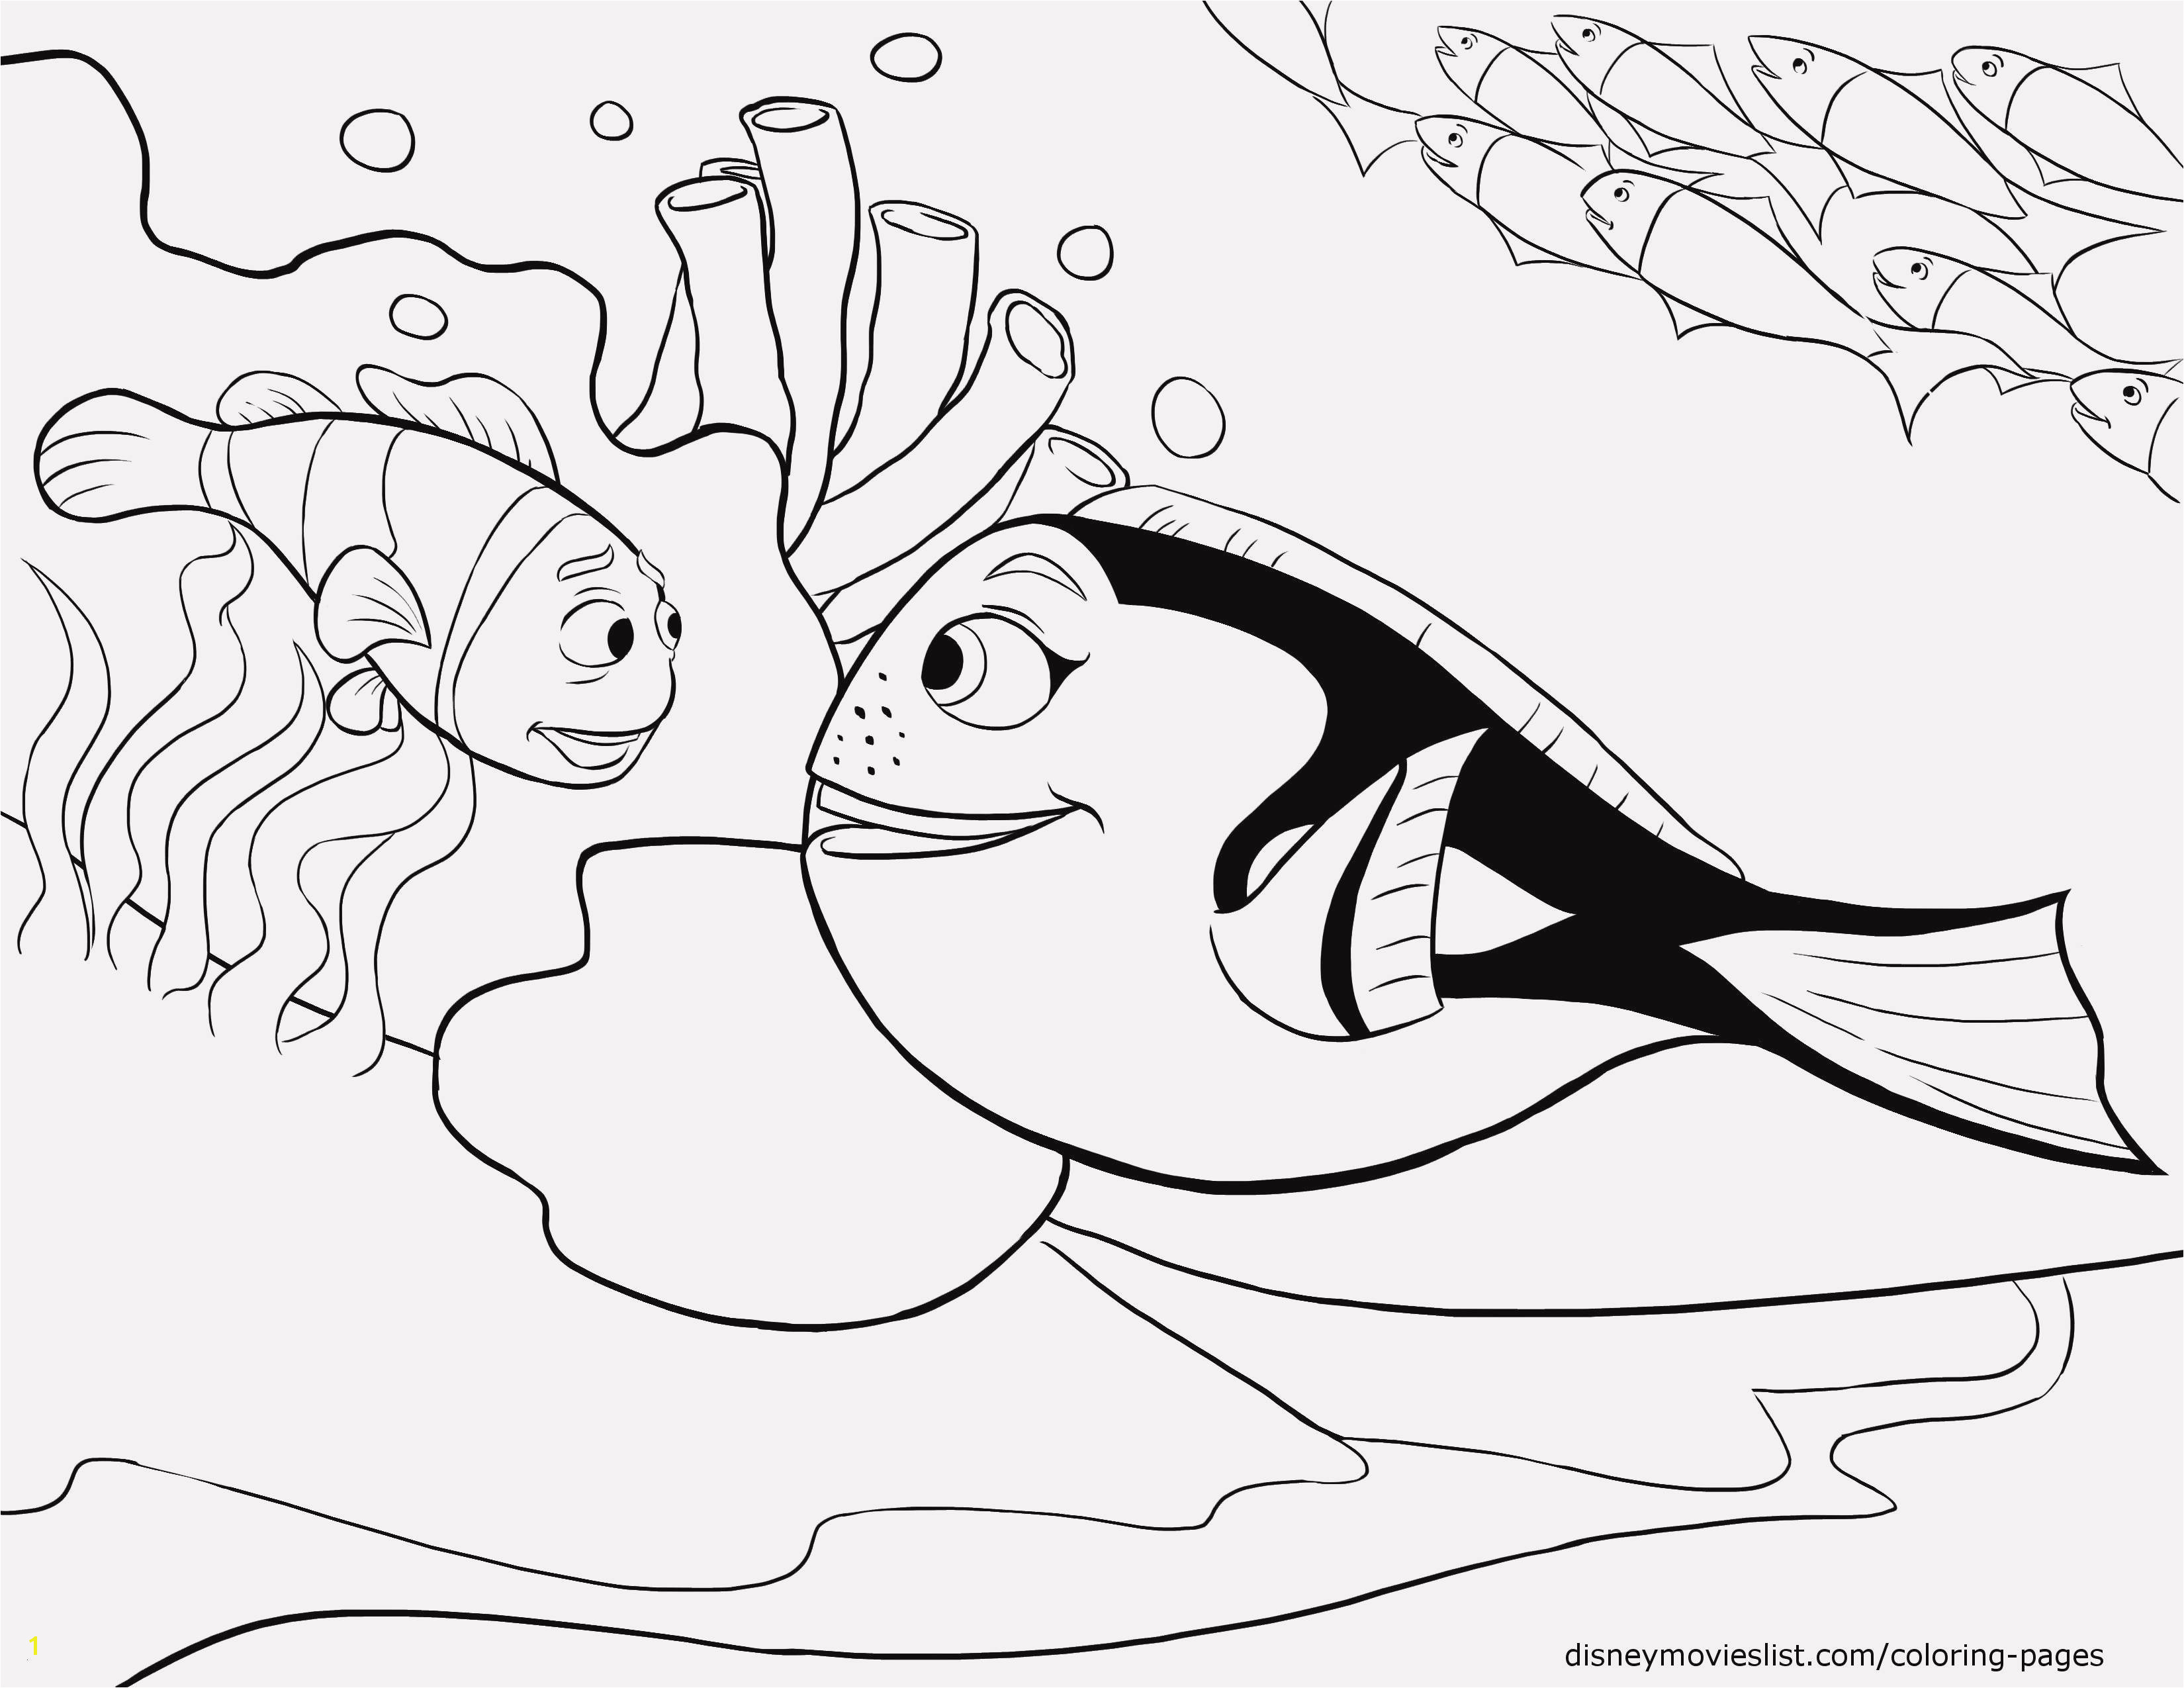 nemo coloring pages beautiful finding nemo coloring pages beautiful printable cds 0d fun time of nemo